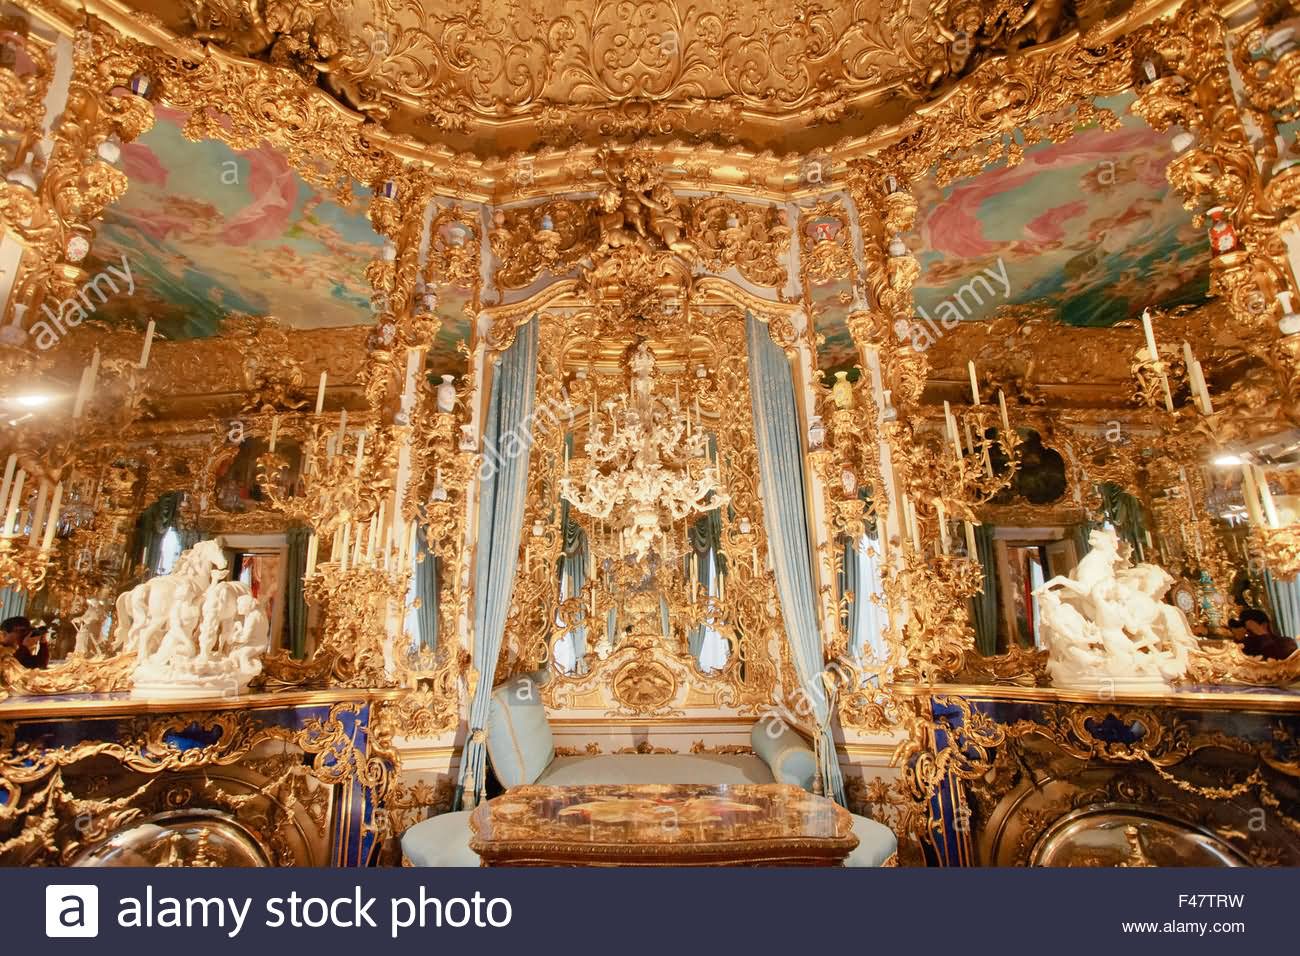 Hall Of Mirrors Inside The Linderhof Palace In Bavaria, Germany